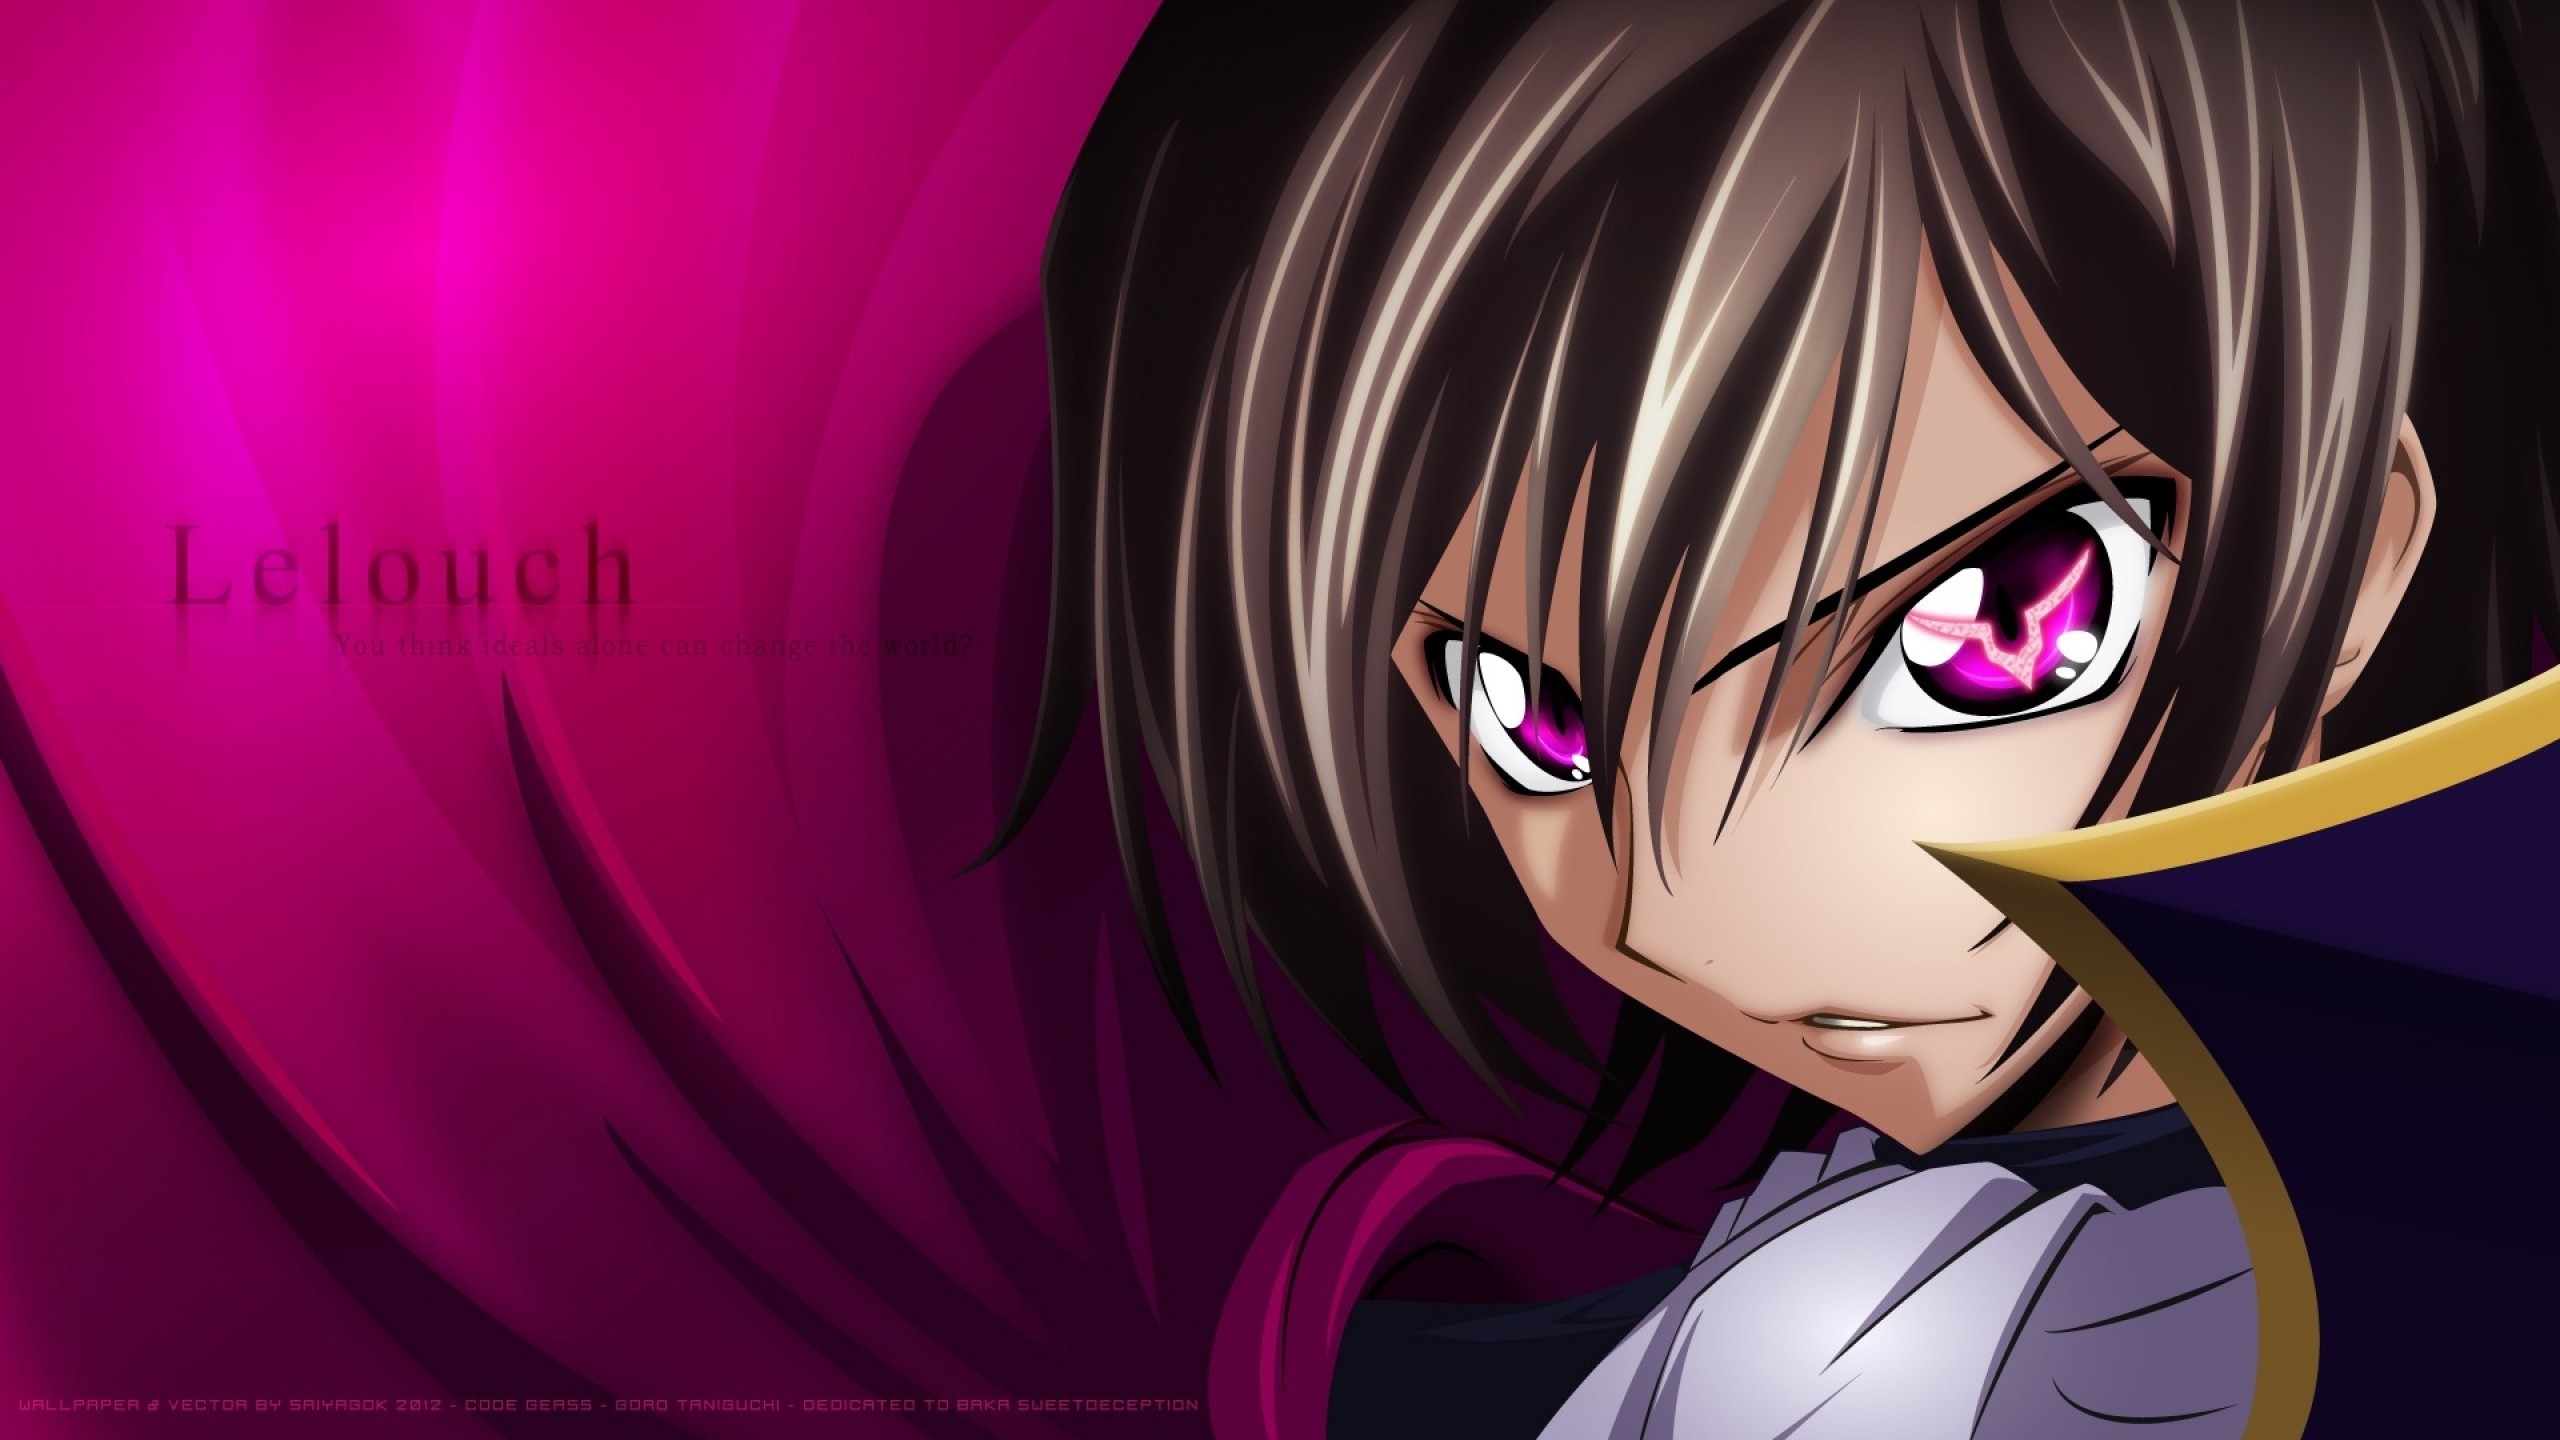 1440x Code Geass Lelouch Lamperouge Anime 1440x Resolution Wallpaper Hd Anime 4k Wallpapers Images Photos And Background Wallpapers Den